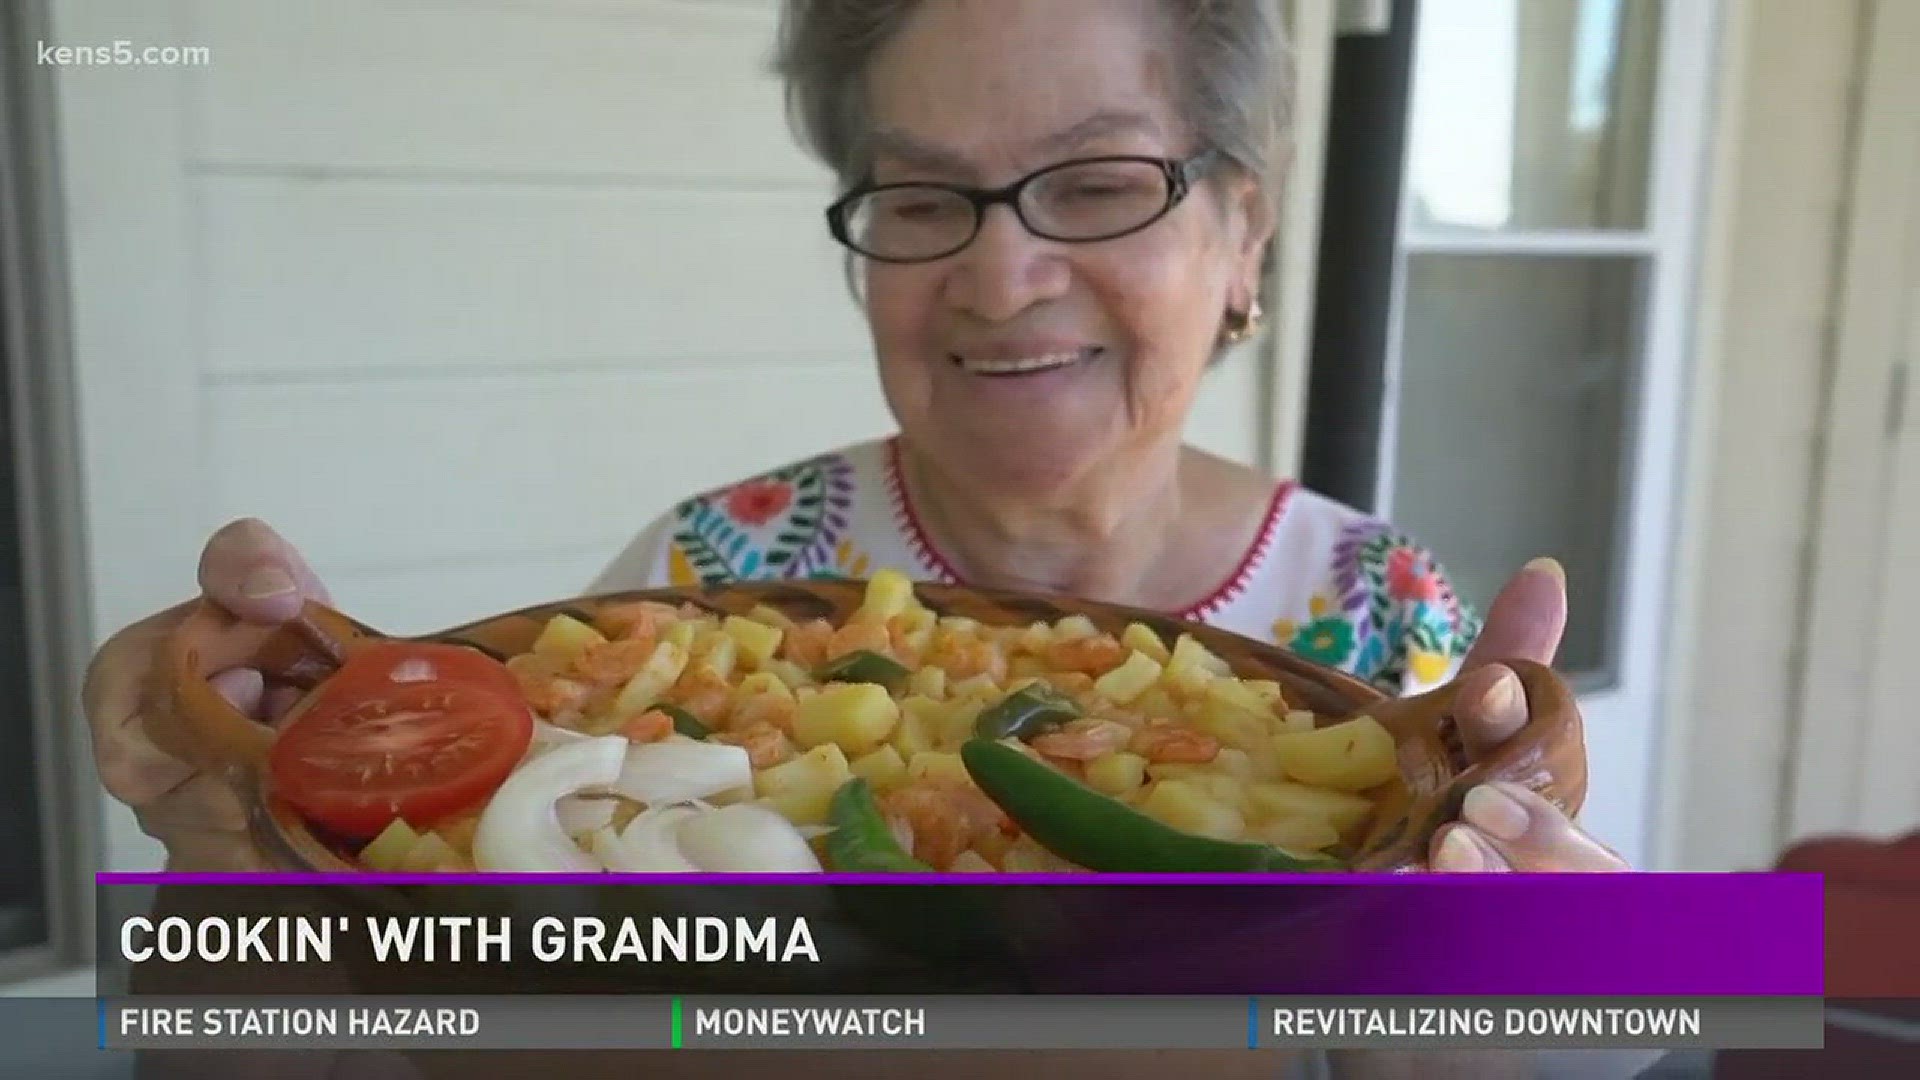 We're wrapping up our week in the kitchen by visiting Grandma Consuela!